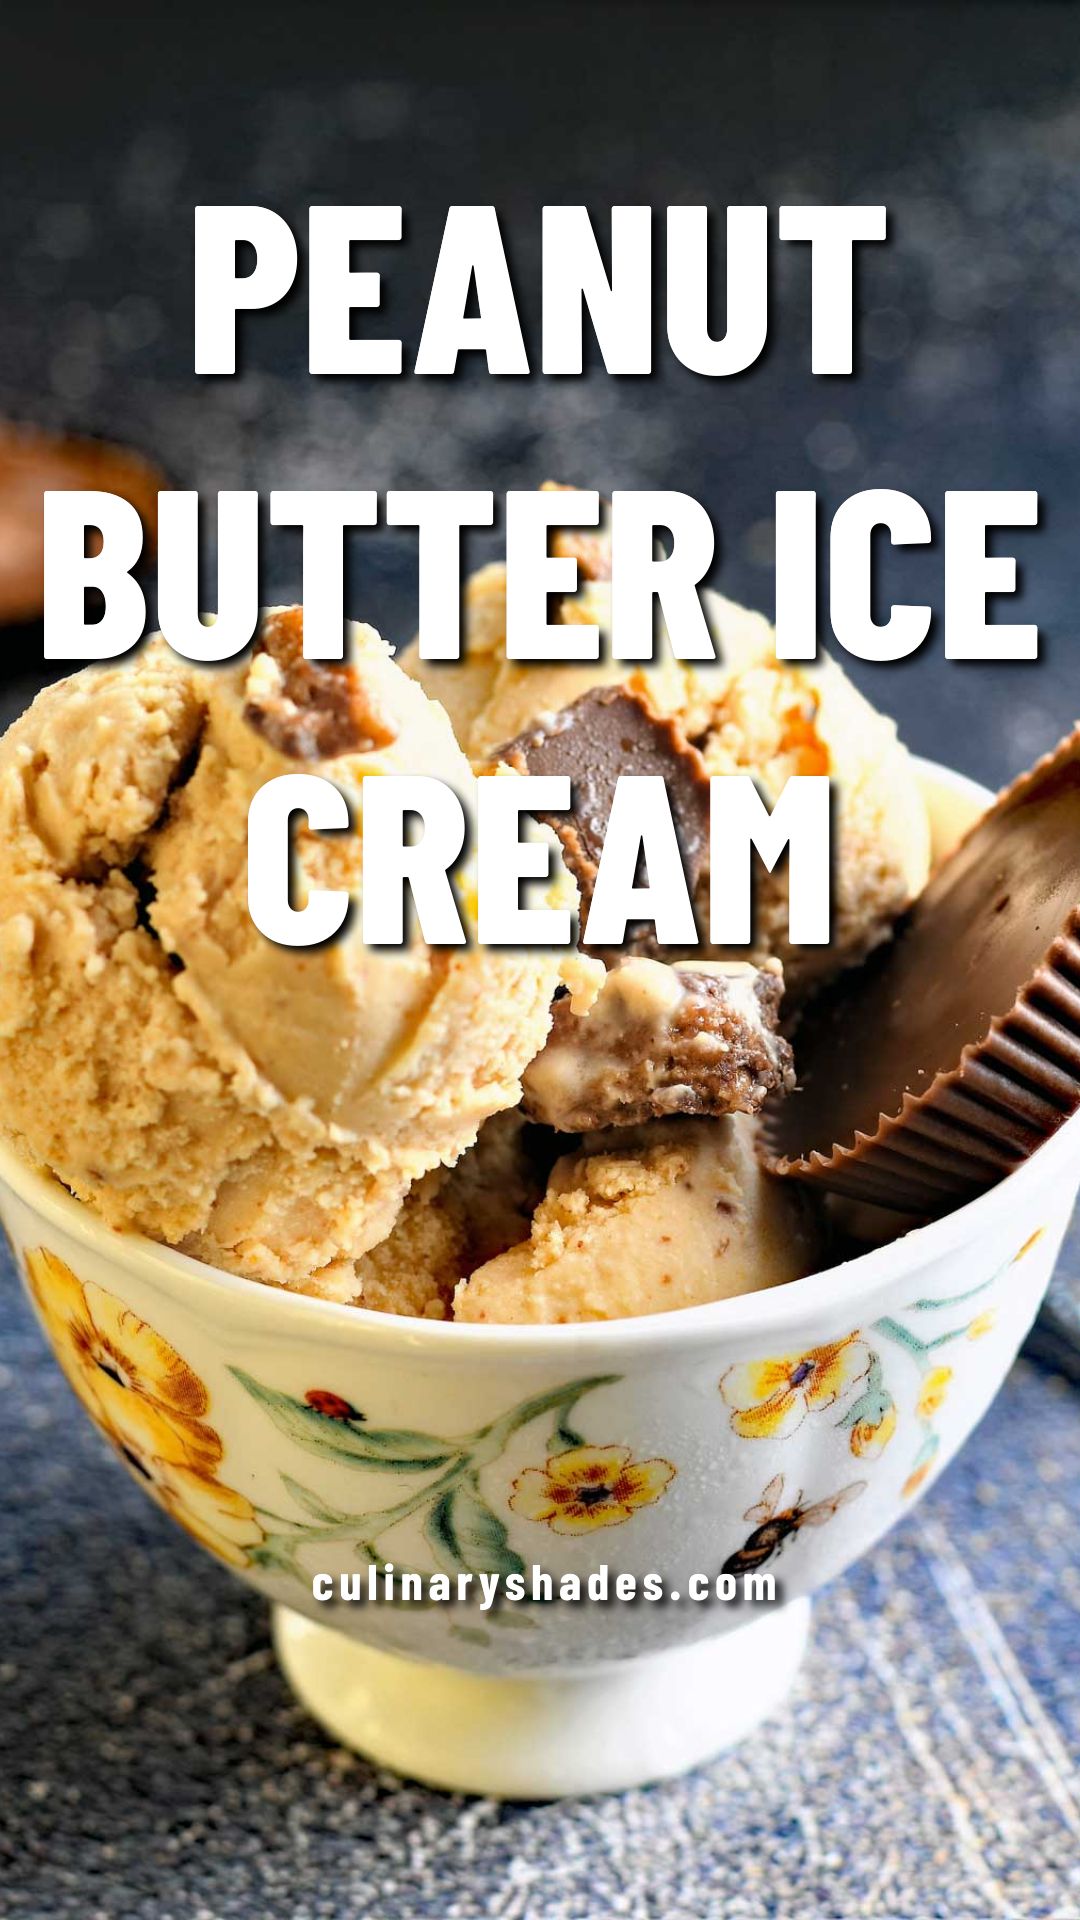 Peanut butter ice cream scoops served in a bowl.